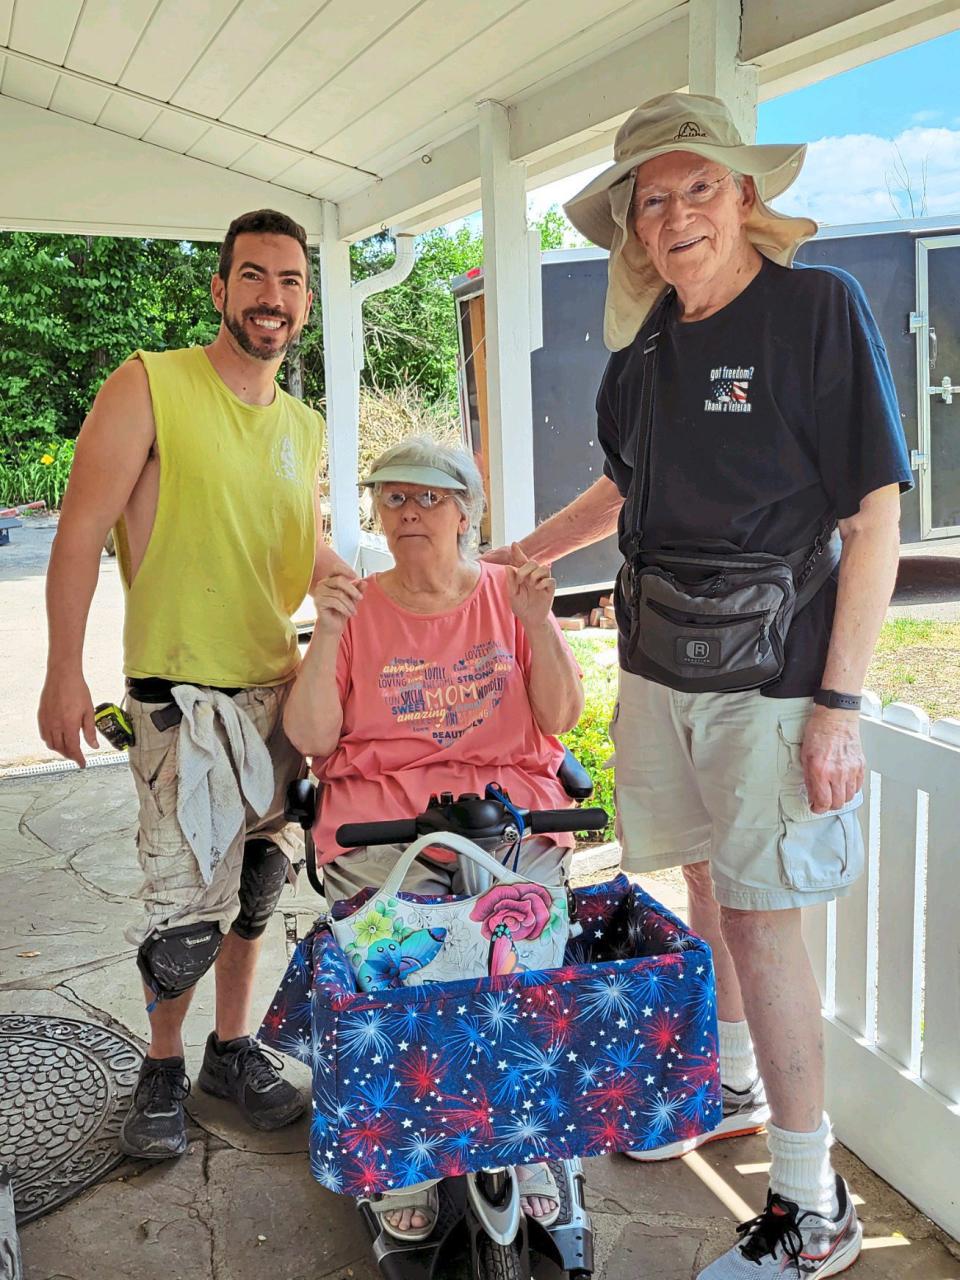 Andrew with house recipients, Bob and Joanie Lesko building homes for veterans